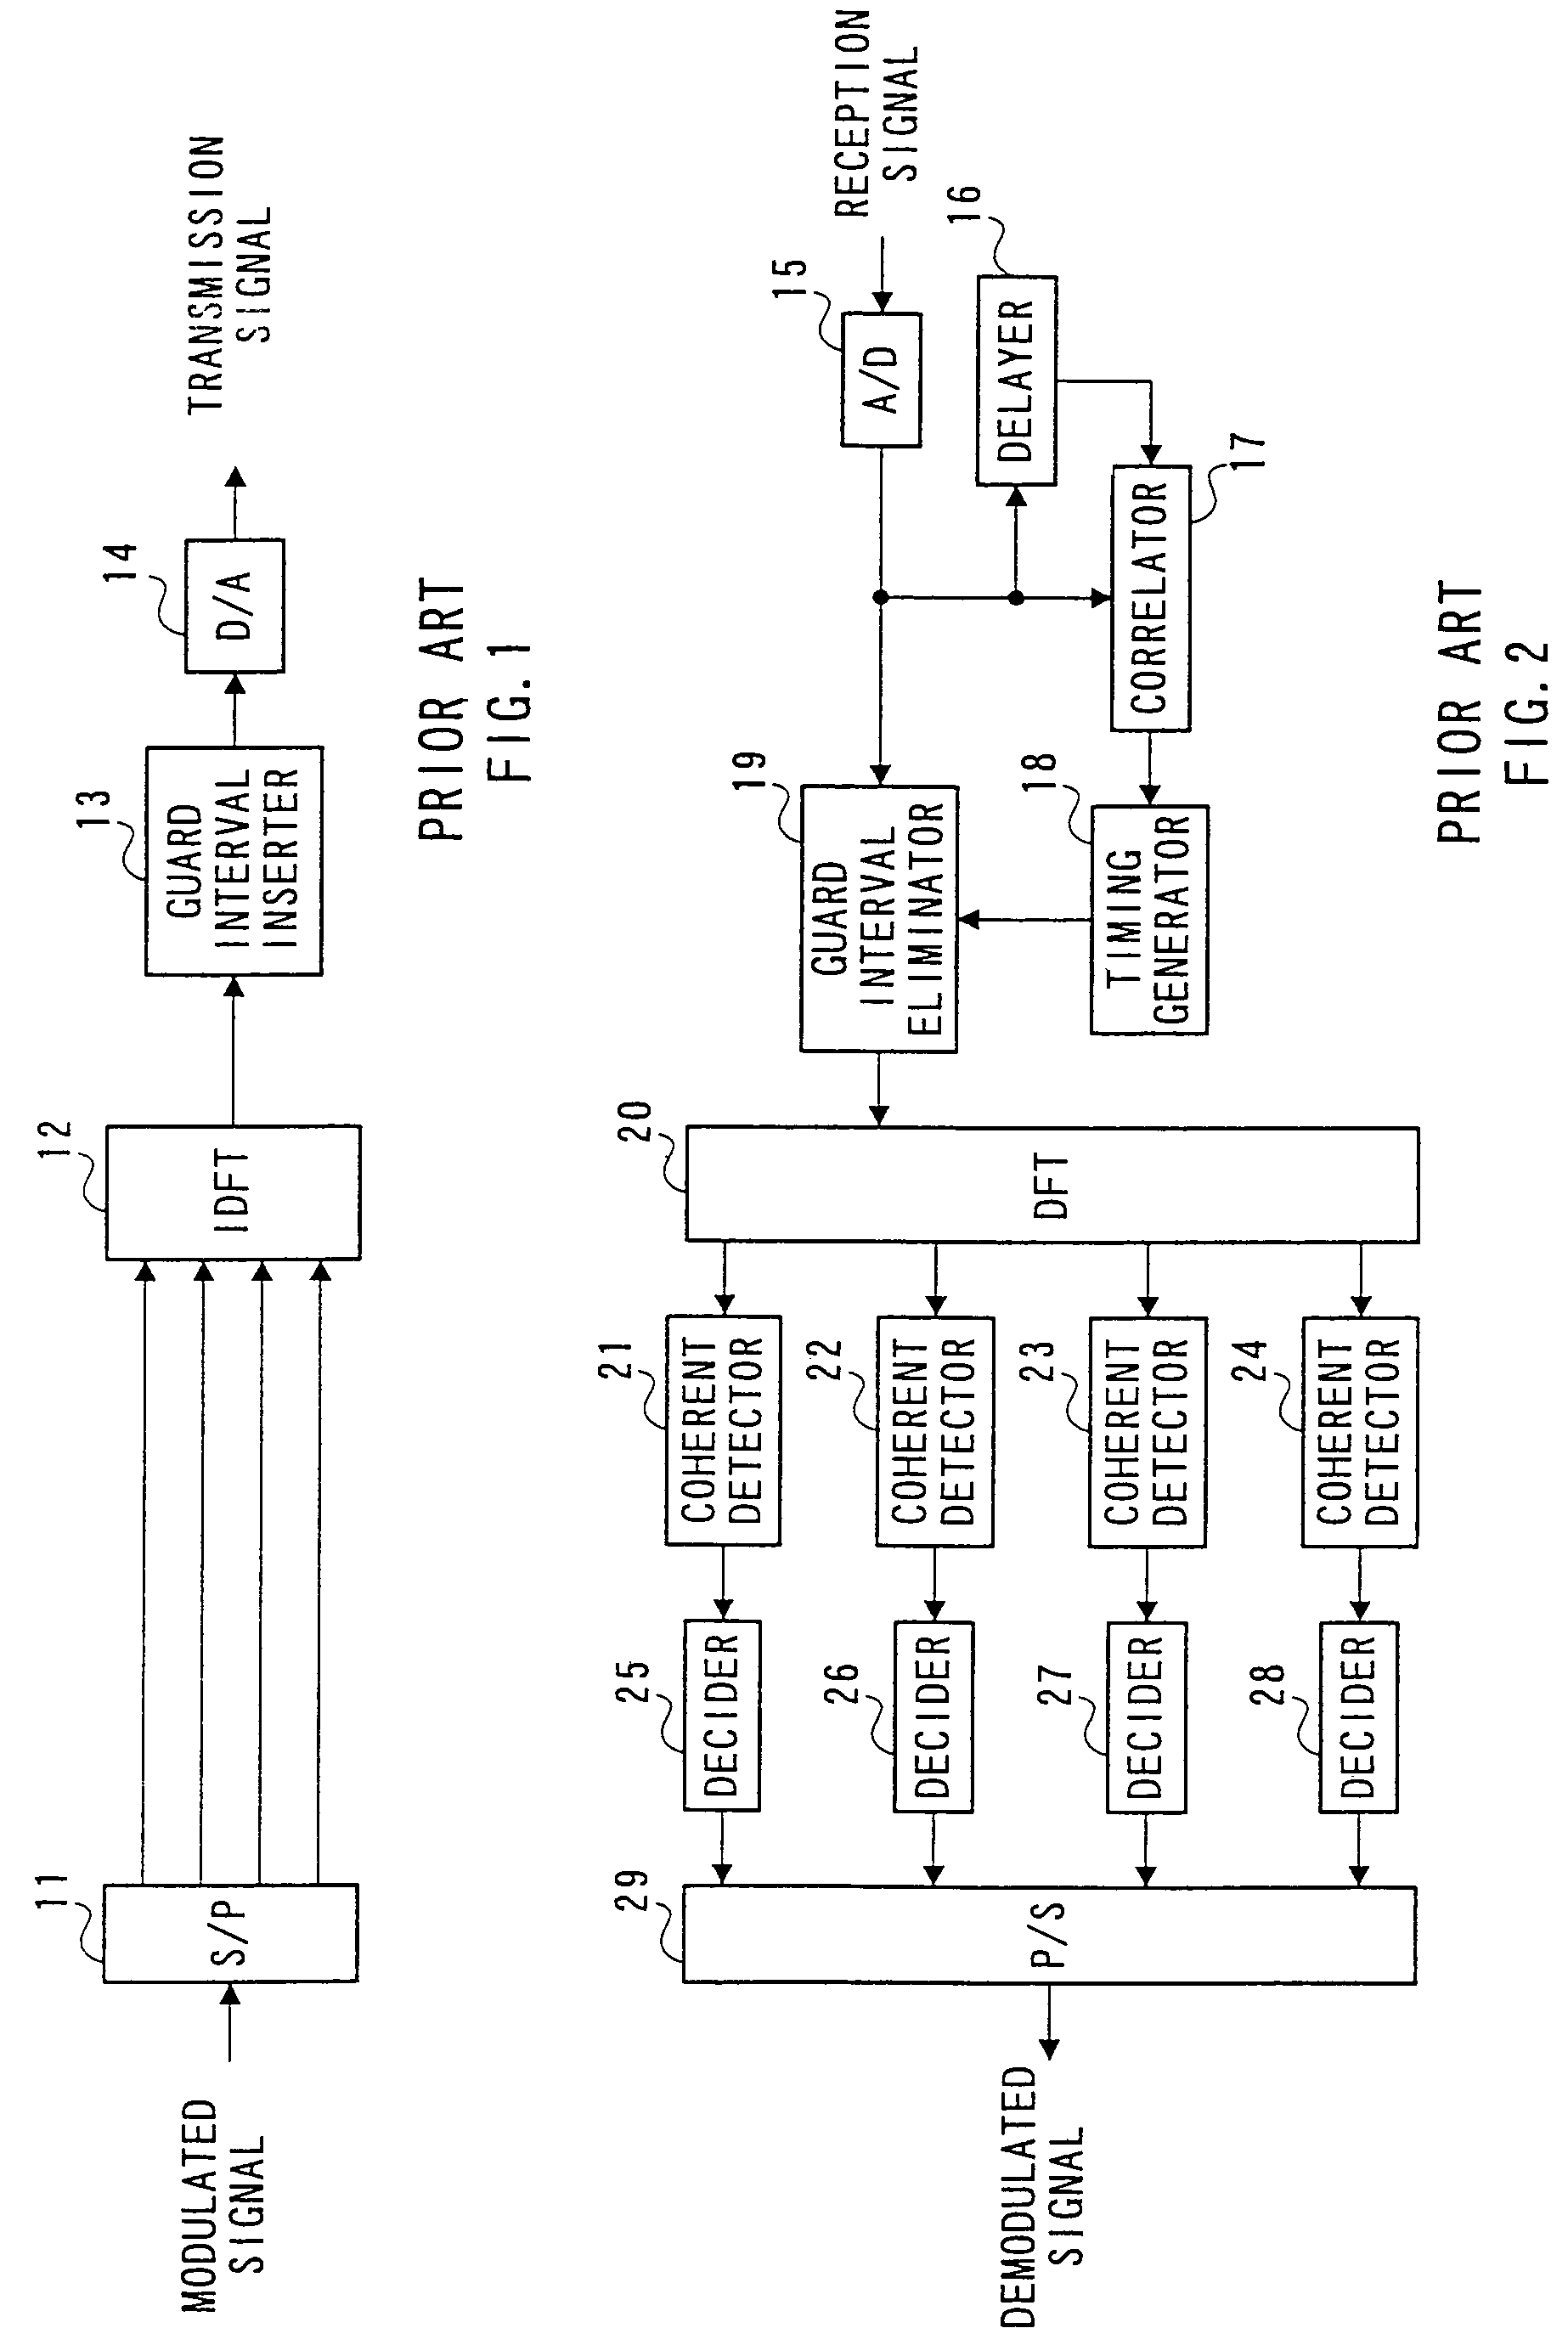 Method and apparatus for setting a guard interval in an OFDM communication